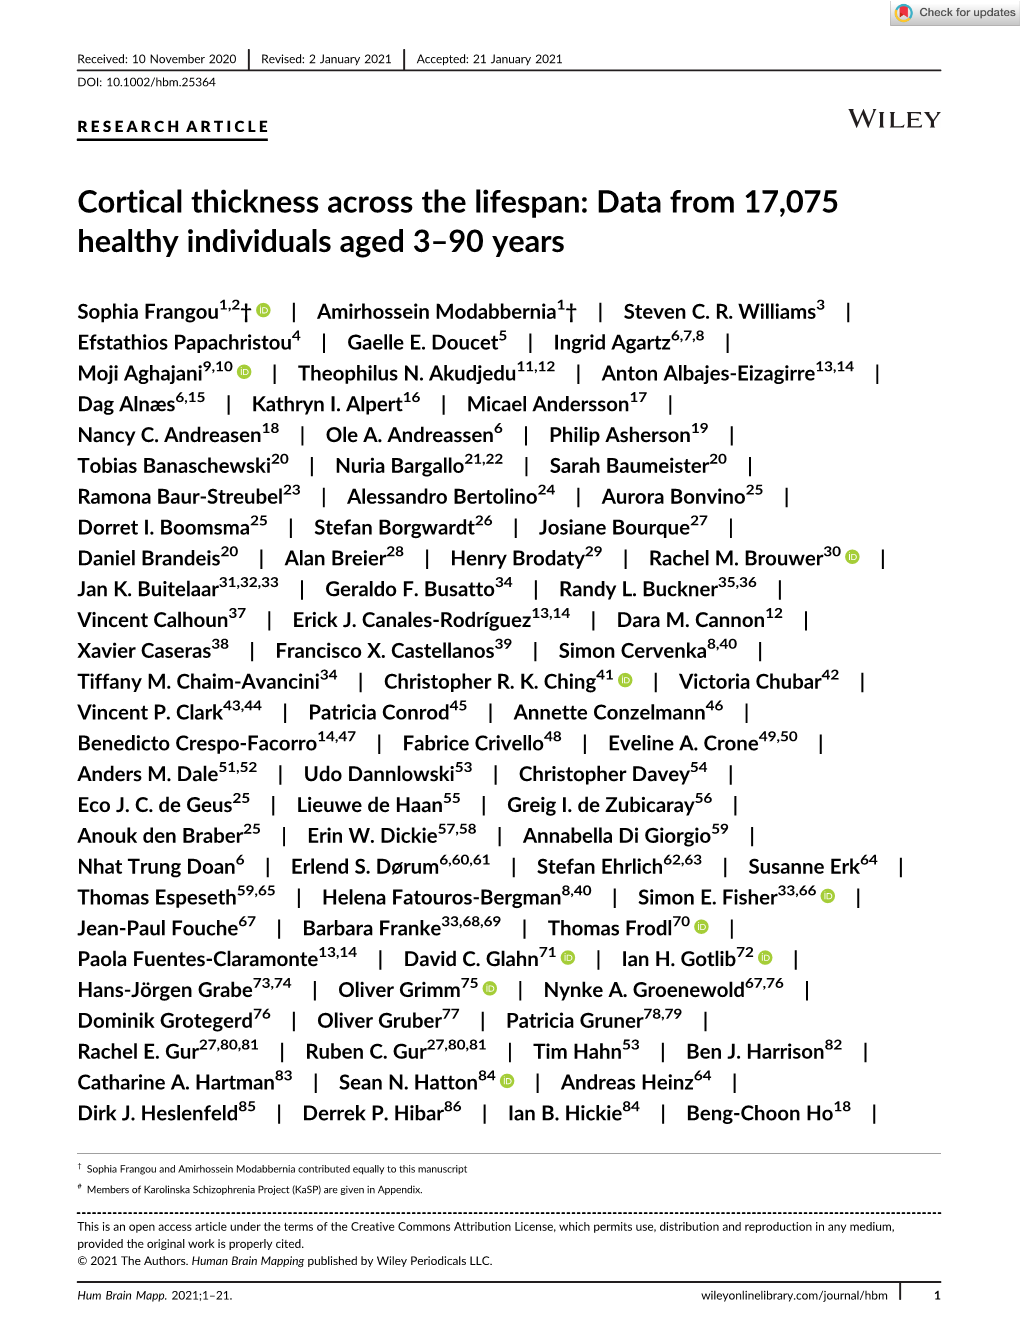 Cortical Thickness Across the Lifespan: Data from 17,075 Healthy Individuals Aged 3–90 Years